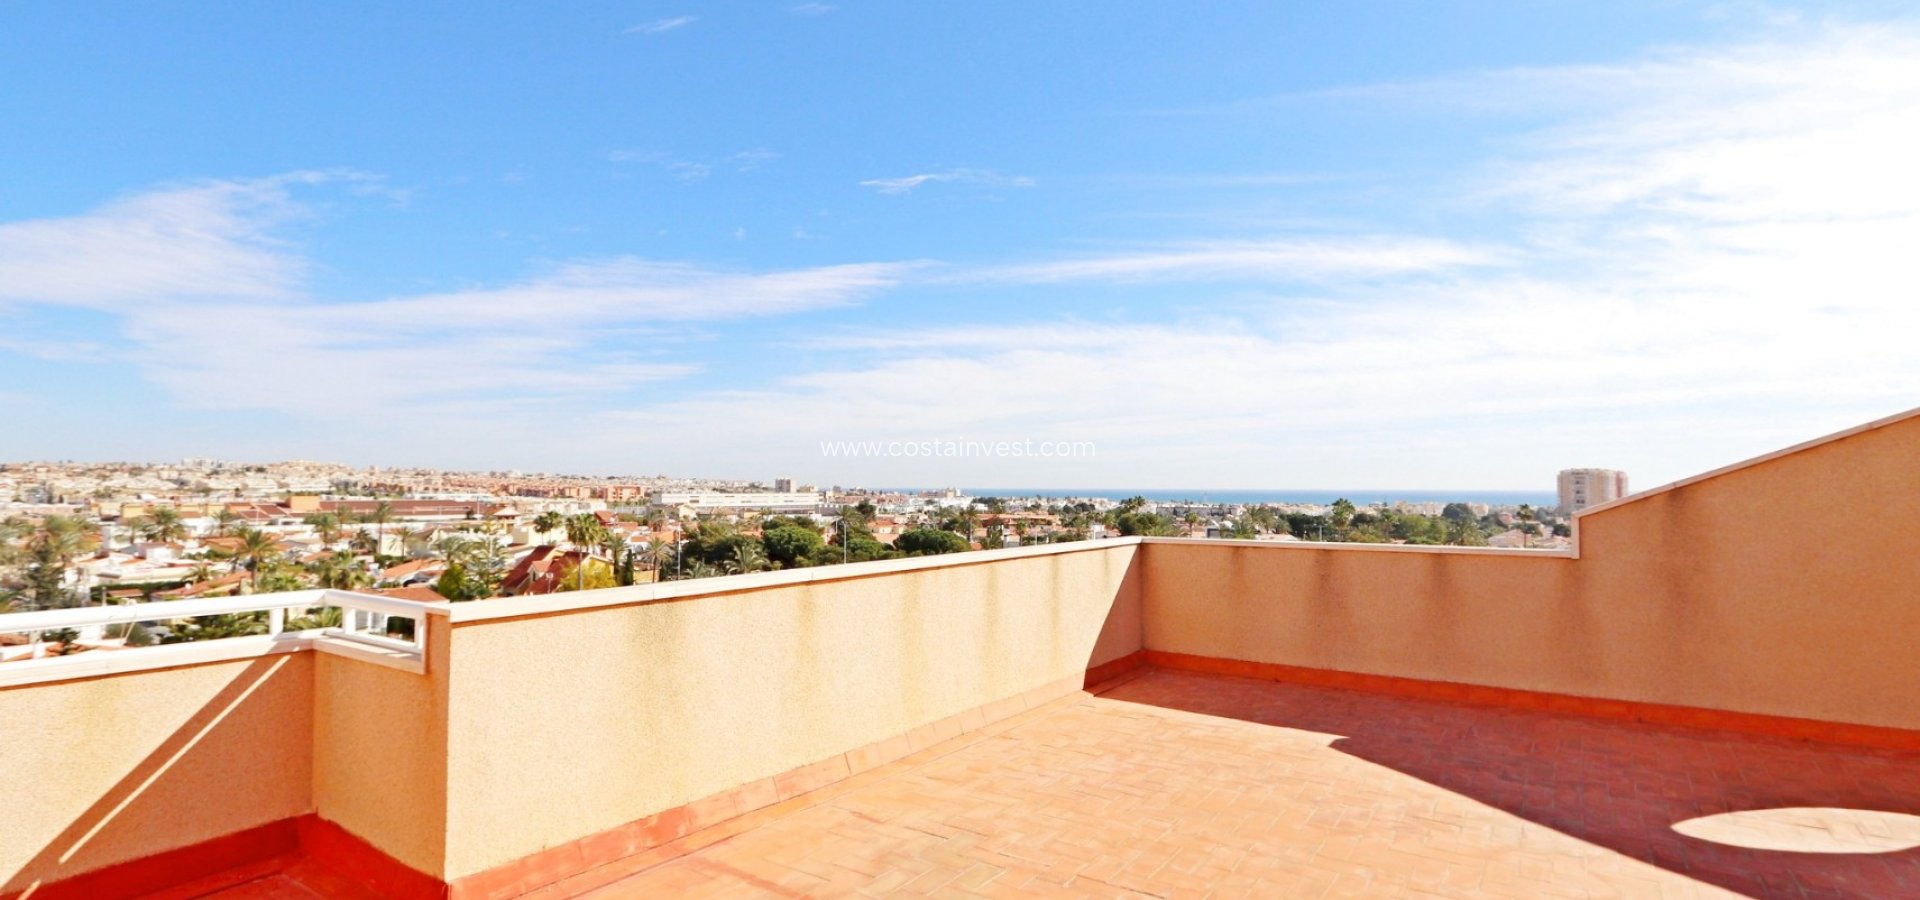 2 bedroom seaview penthouse in Torrevieja with communal pool and private parking